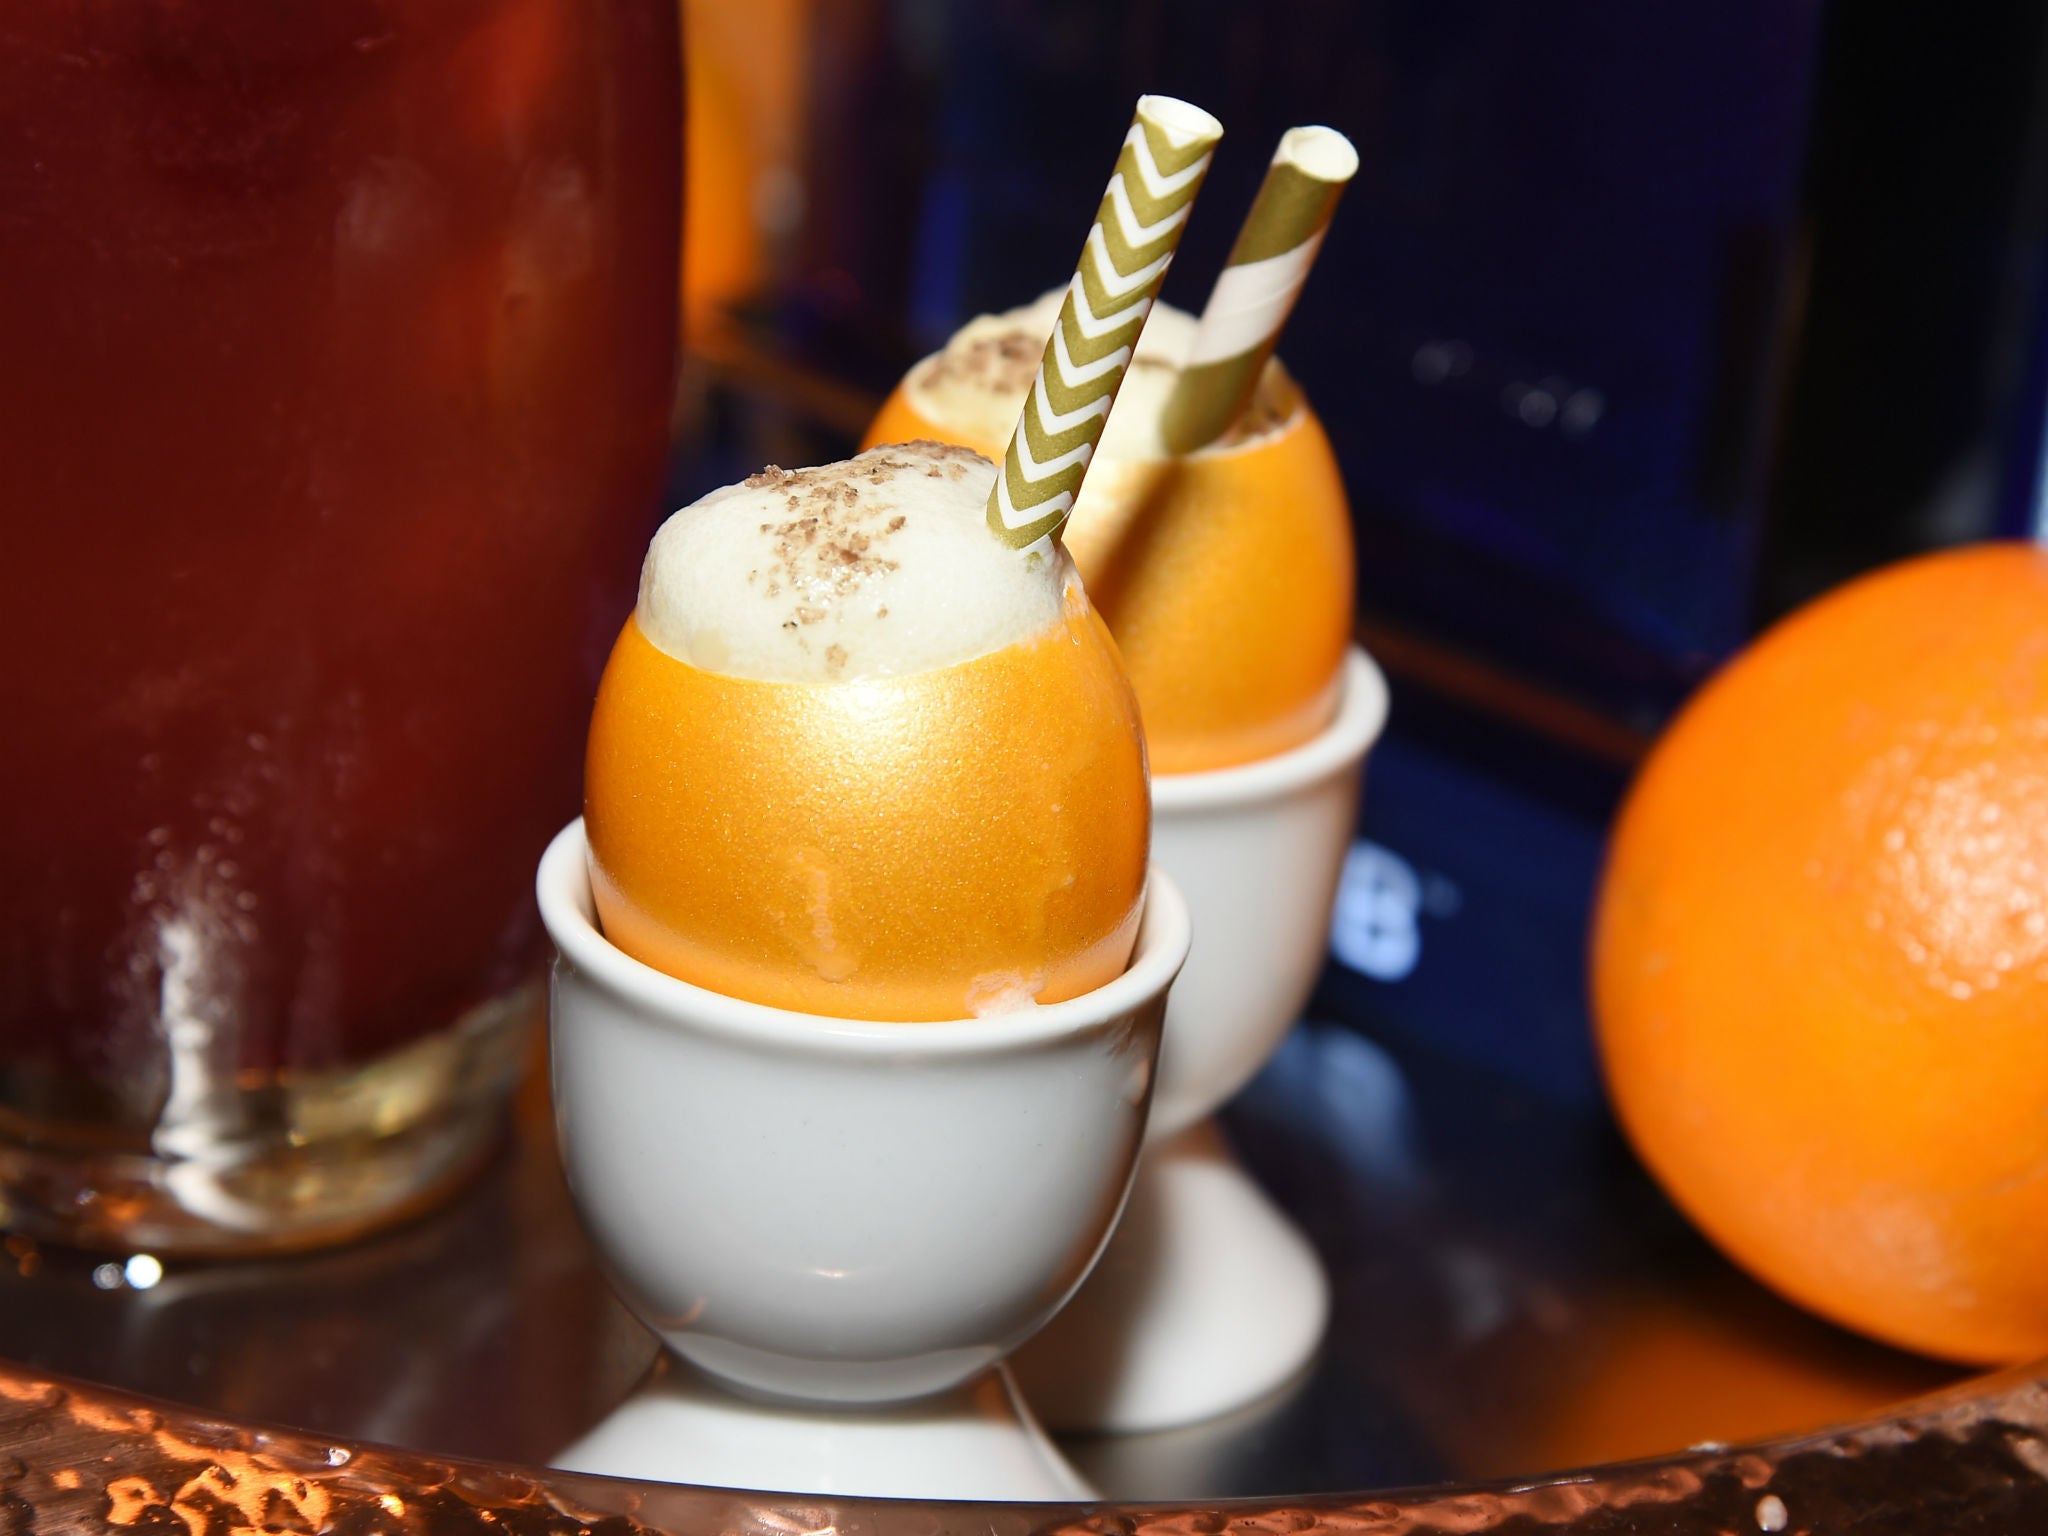 Whisky foam cocktails served in gold eggs at the Governors Ball